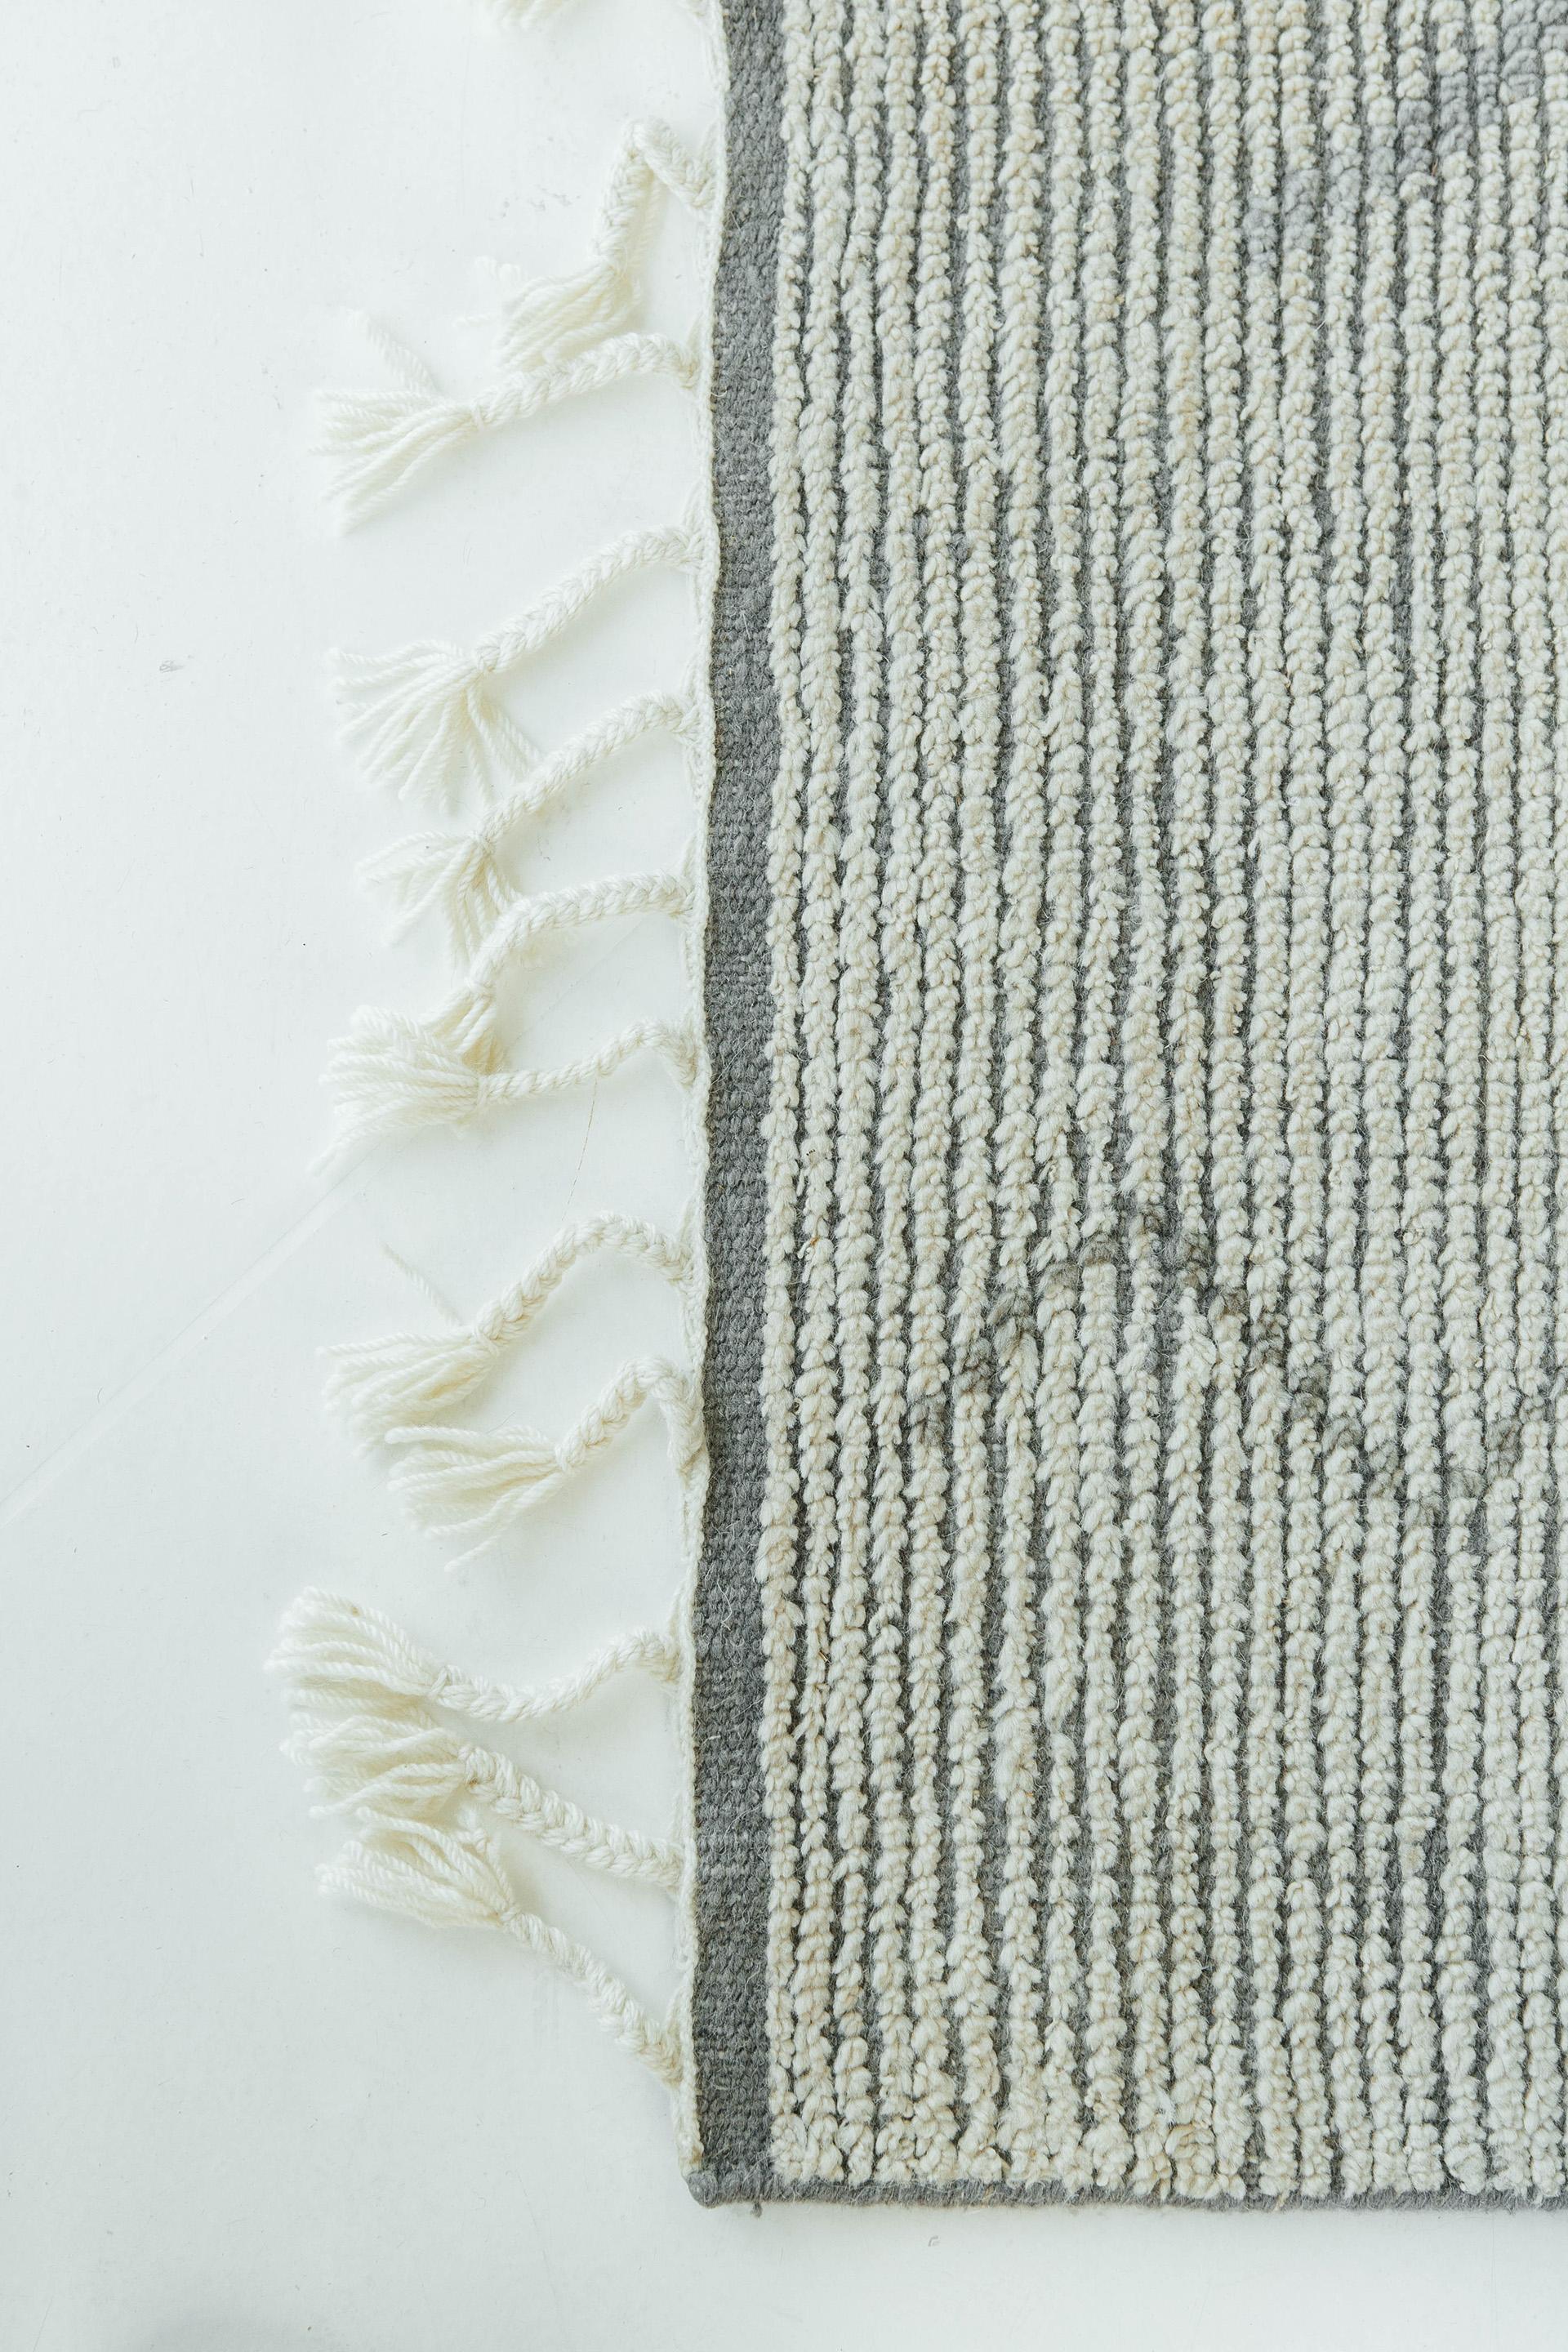 Designed in Los Angeles with inspiration from the Atlas Mountains of Morocco is this unique tribal rug. Weaved with handspun wool, this pile weave consists of a charming ribbed surface as well as intuitive diamond motifs that are latticed in pale